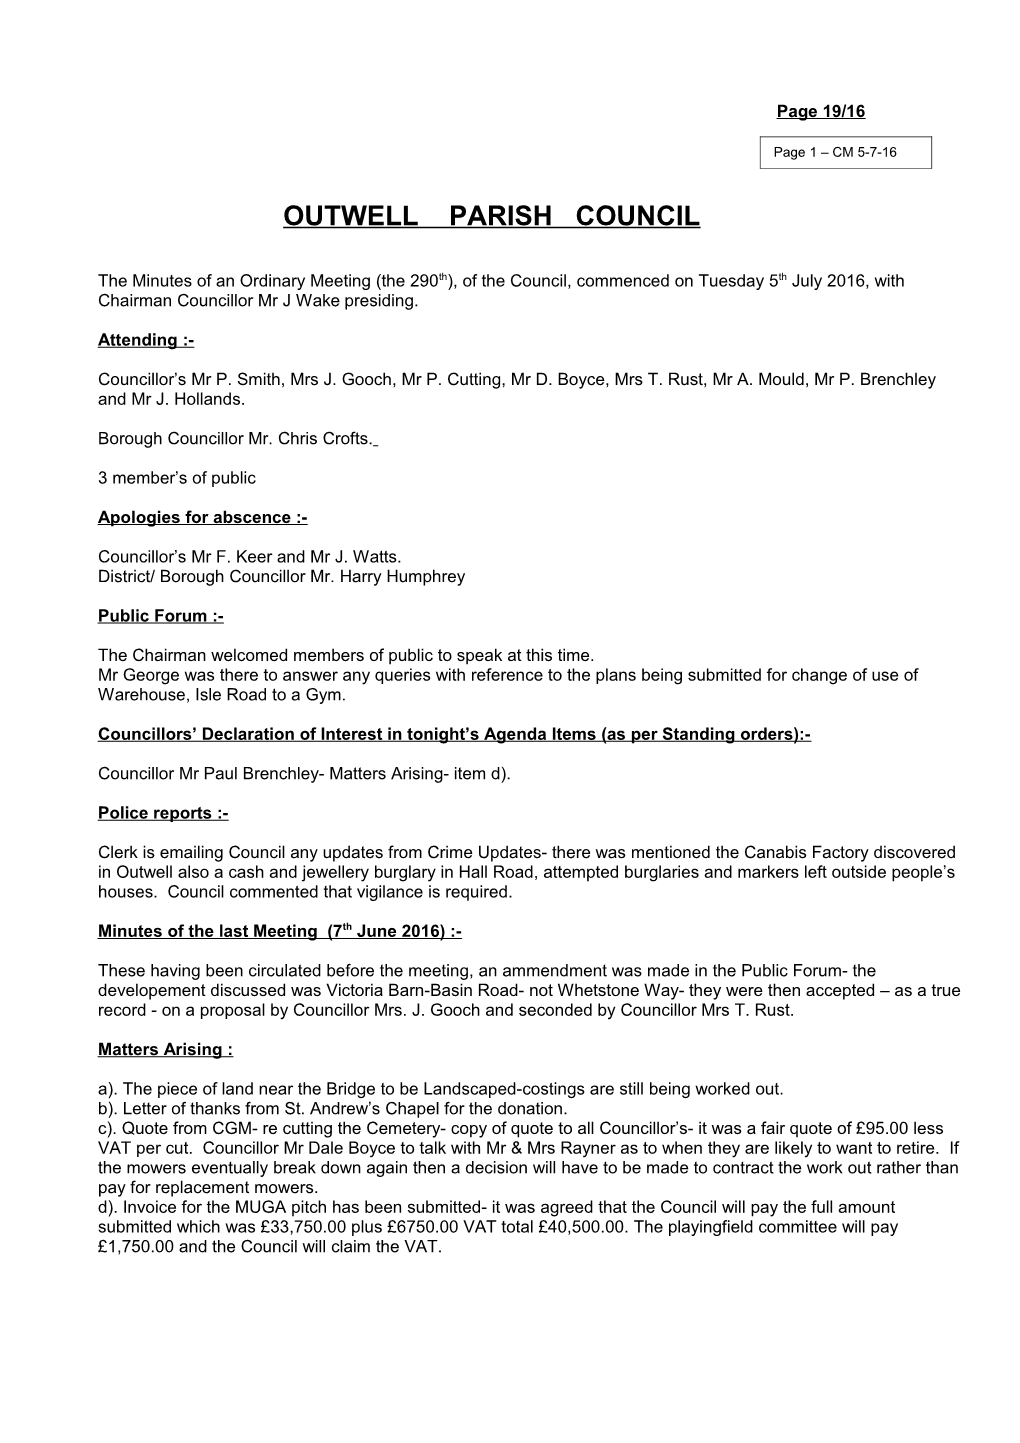 Outwell Parish Council